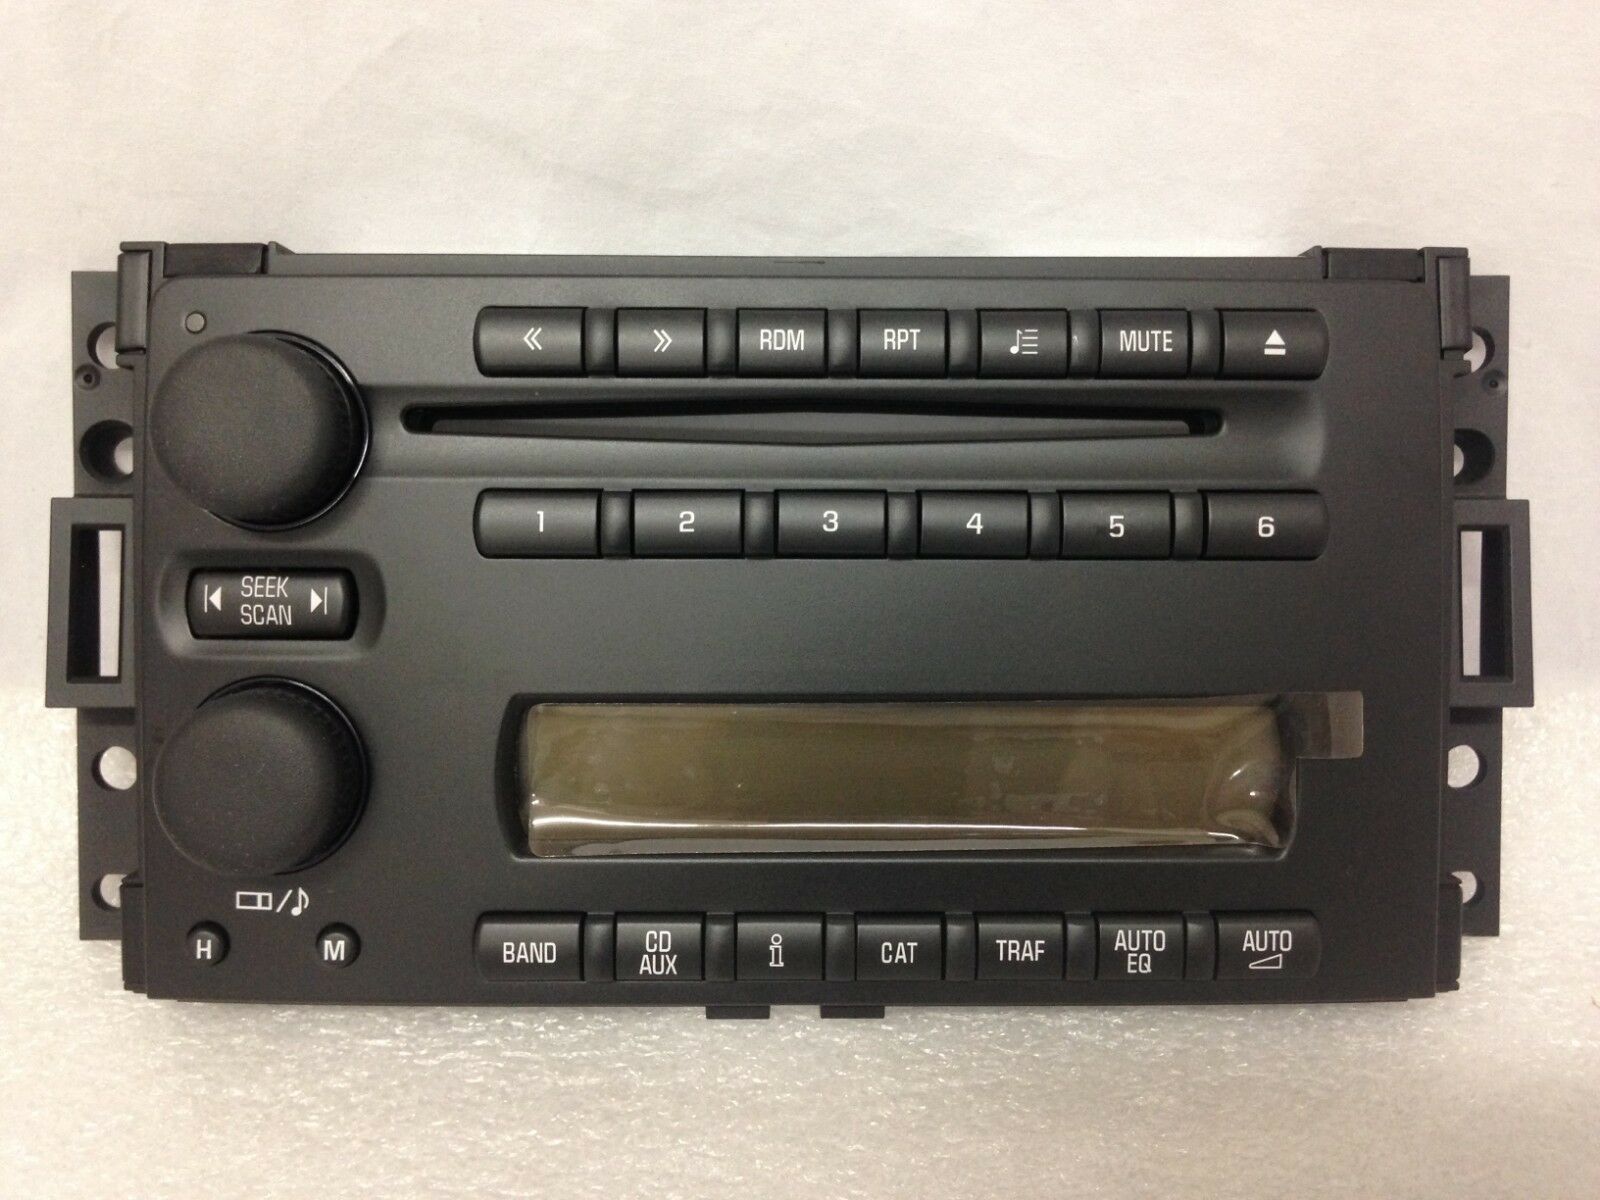 GM CD radio face +buttons +knobs (2005+ Continental Siemens) NEW